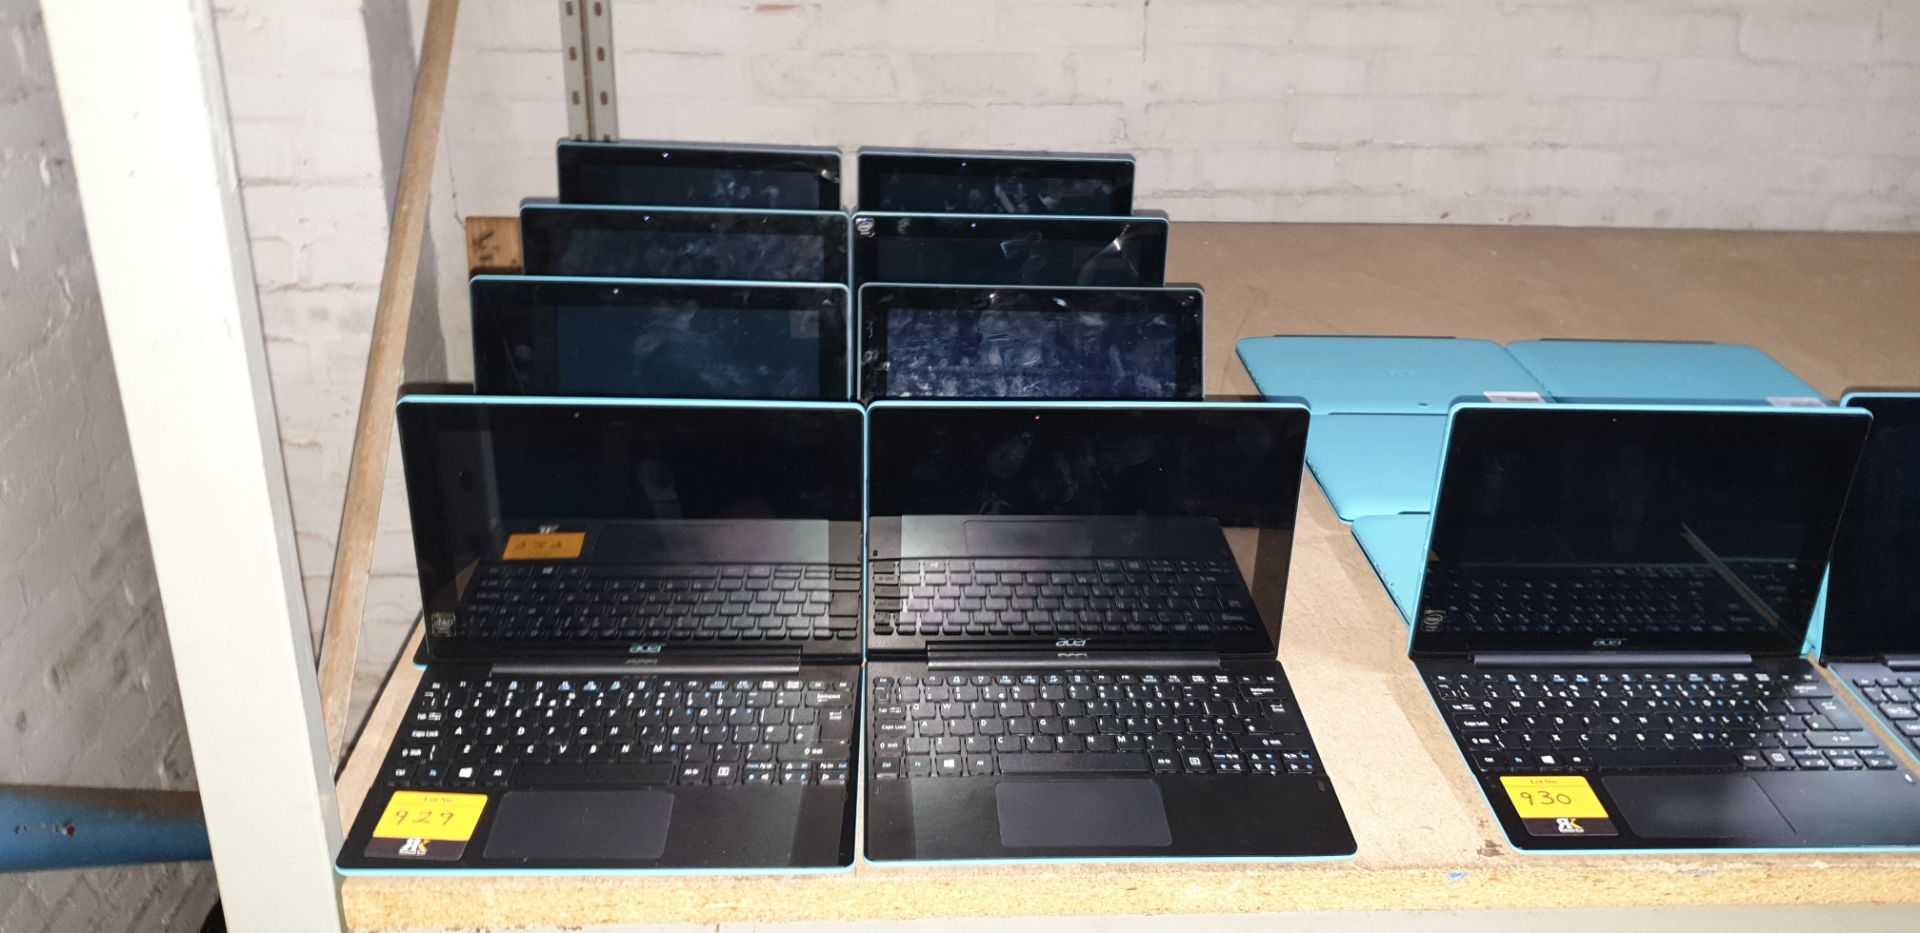 8 off Acer Switch 10E Atom computers with touchscreen displays & detachable keyboards. No power pack